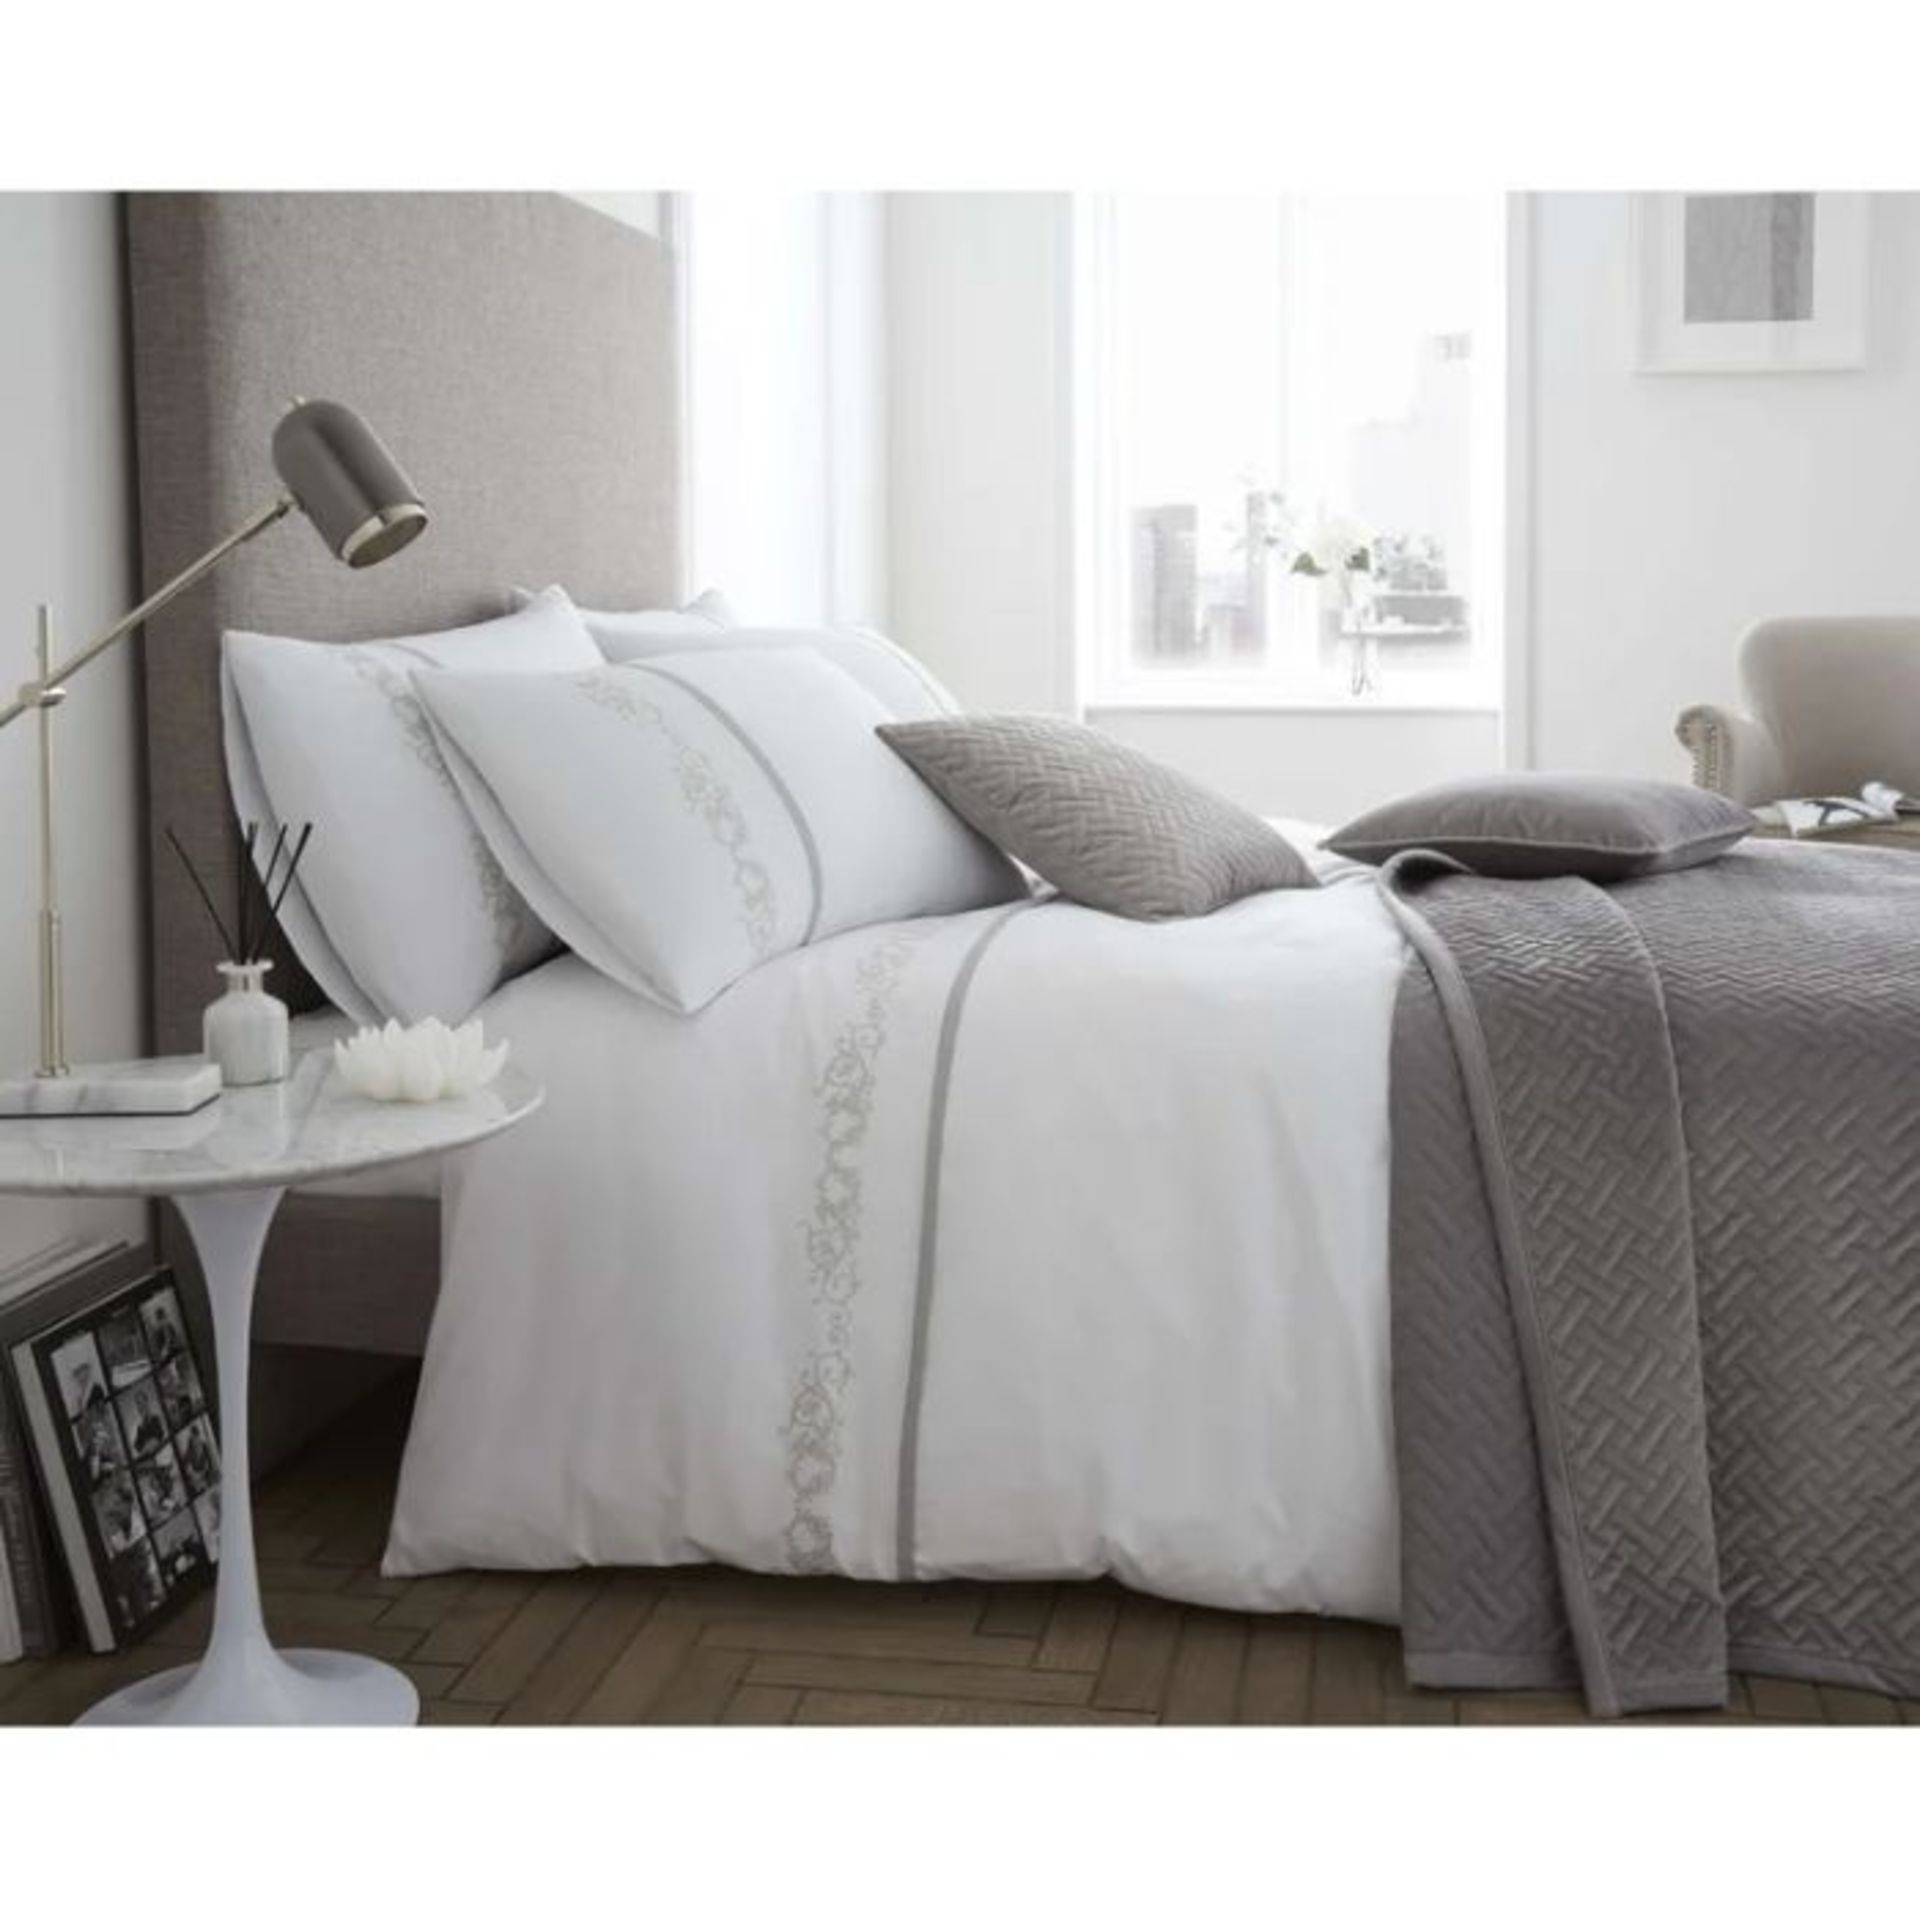 Marlow Home Co., Culberson White 200 TC Traditional Duvet Cover Set (GREY) (DOUBLE) - RRP£27.99( - Image 2 of 4